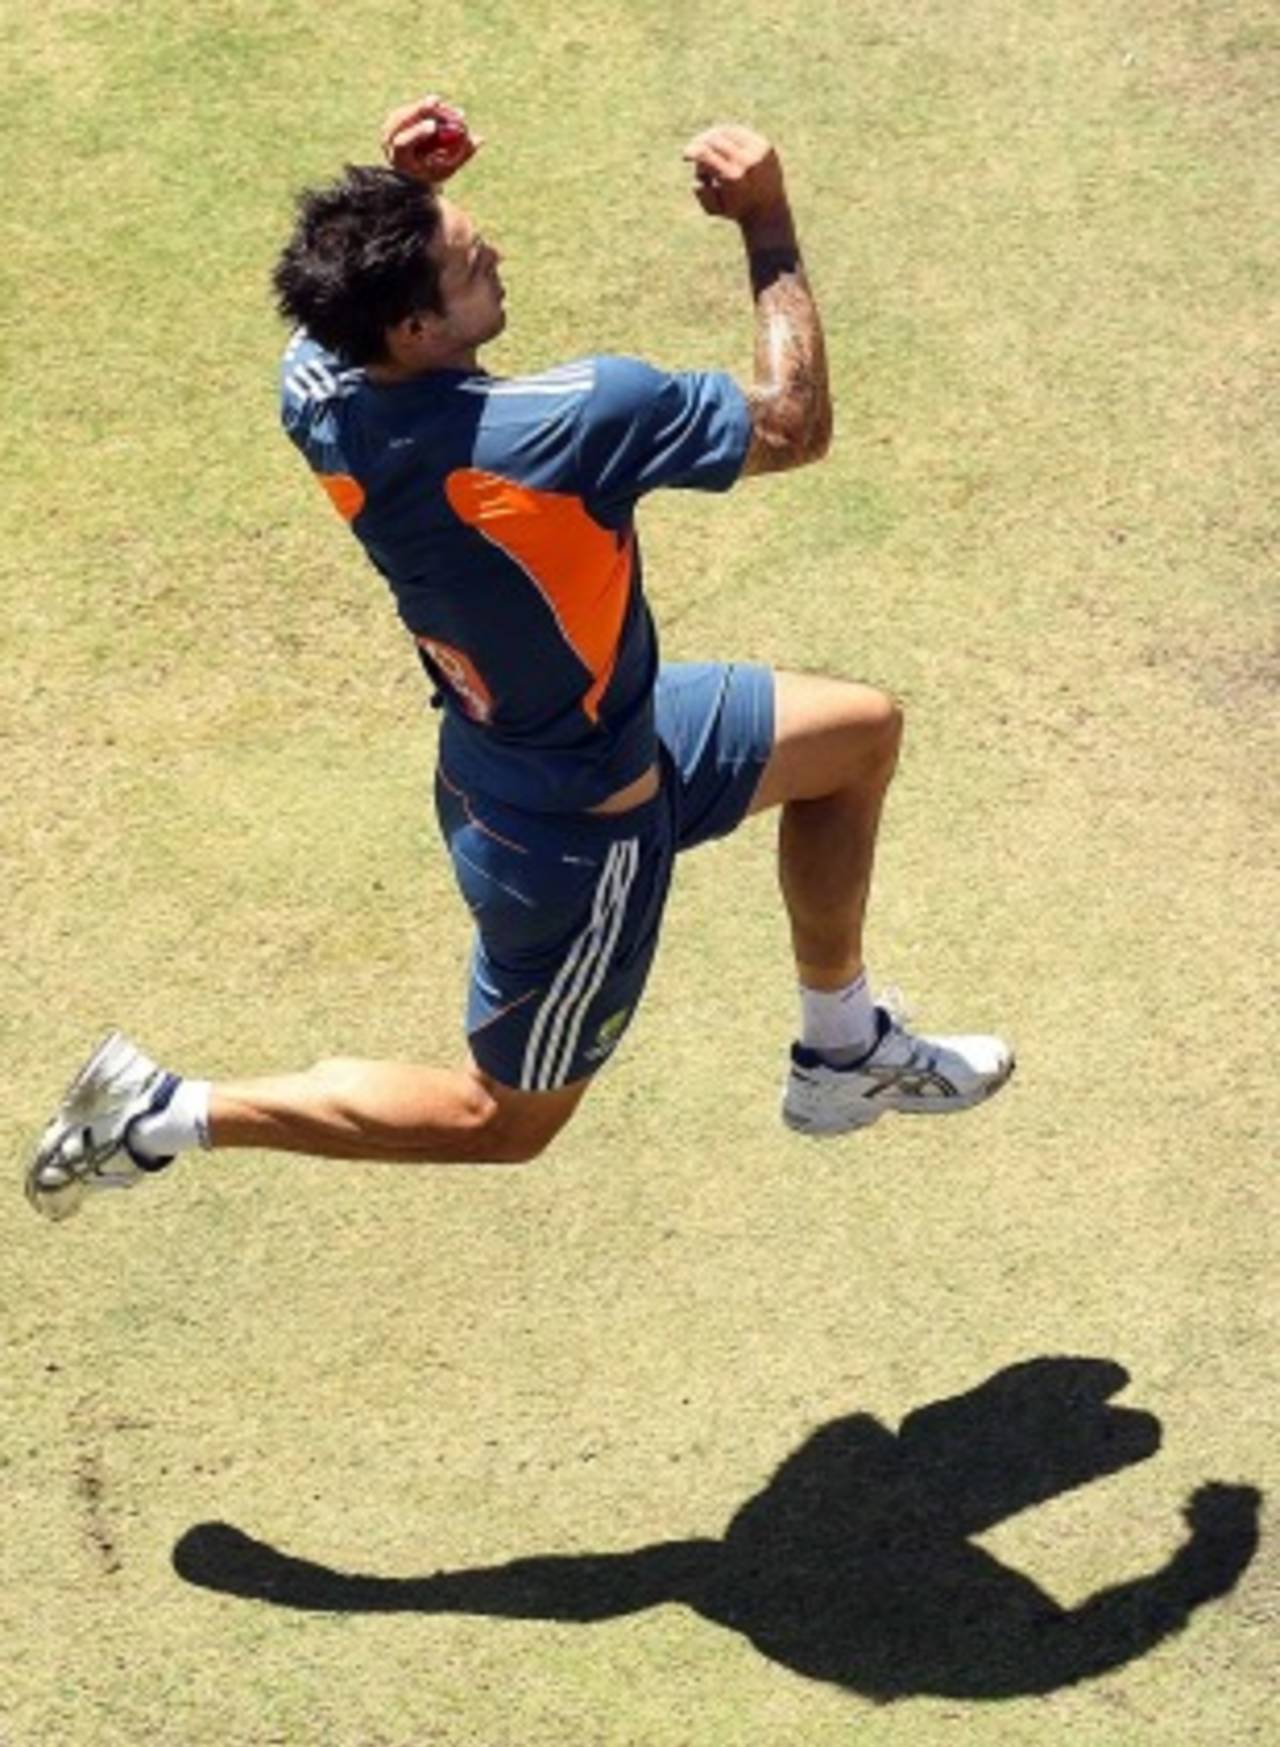 Mitchell Johnson is set to earn a recall, Perth, December 13, 2010